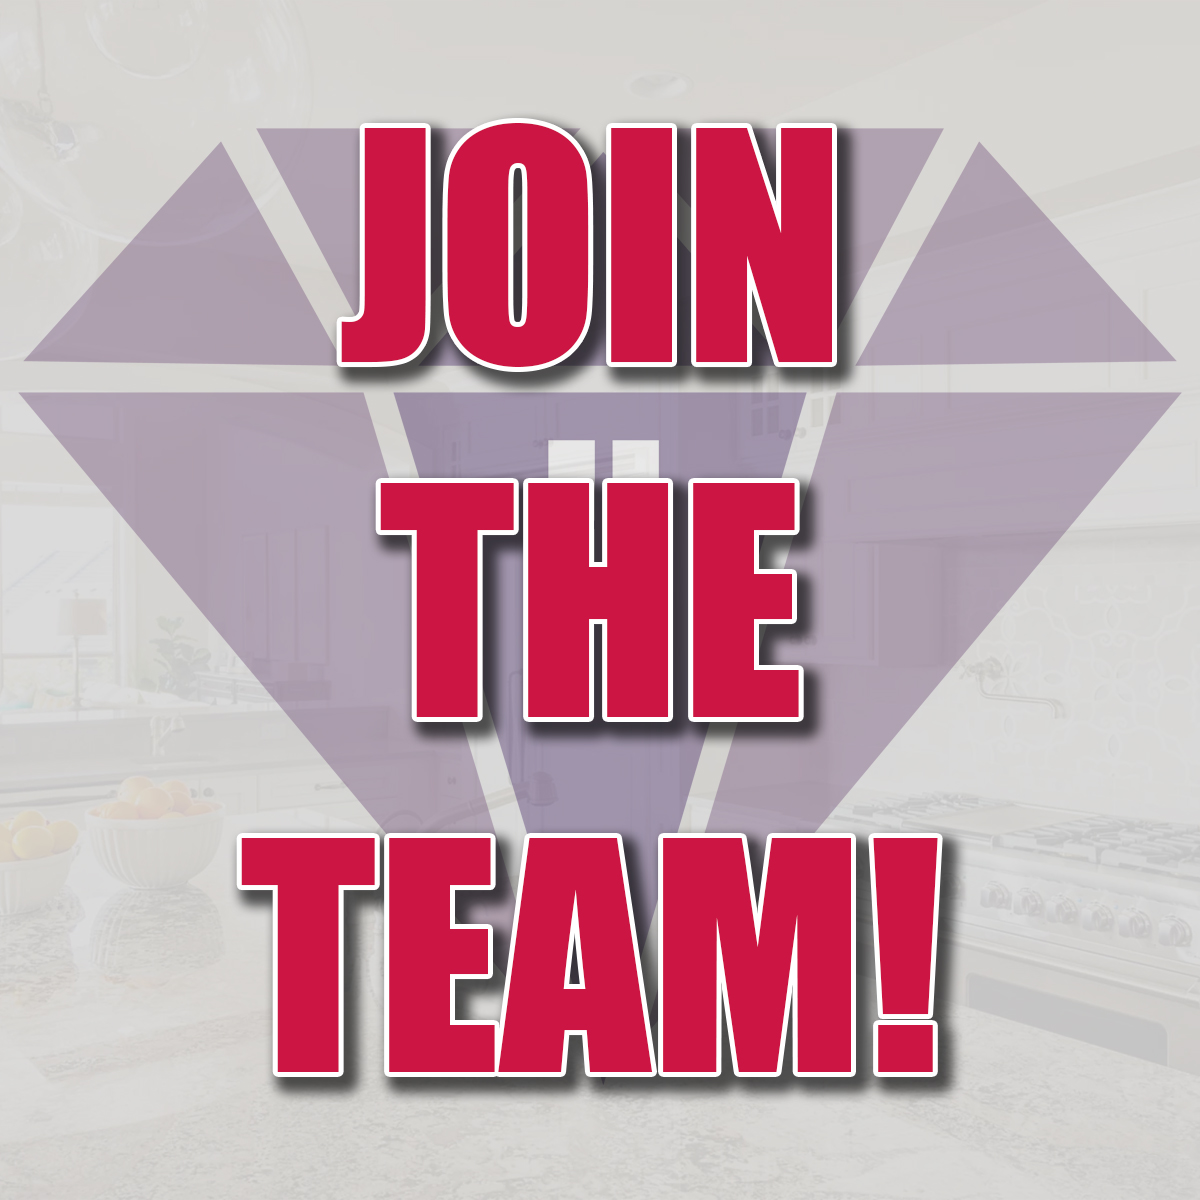 JOIN THE TEAM!